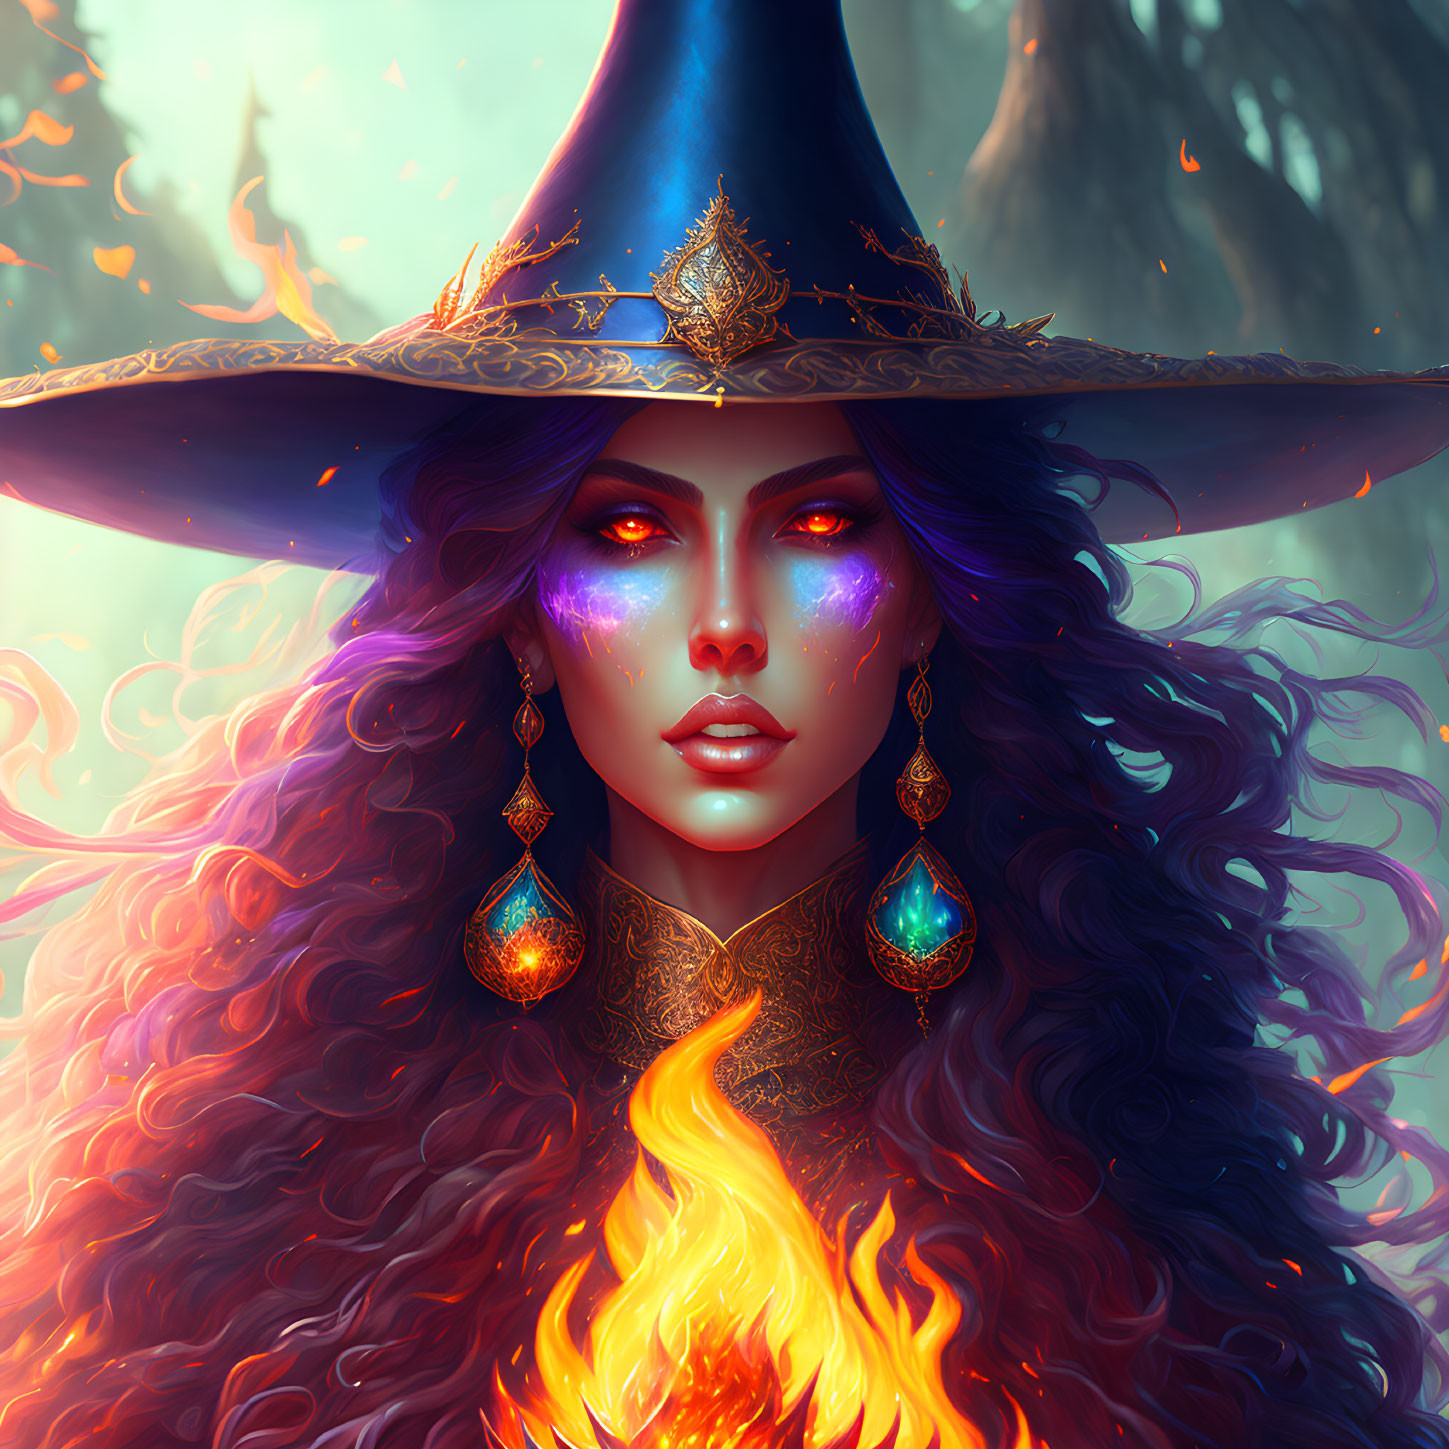 Mystical witch with curly hair and purple eyes casting a fiery spell